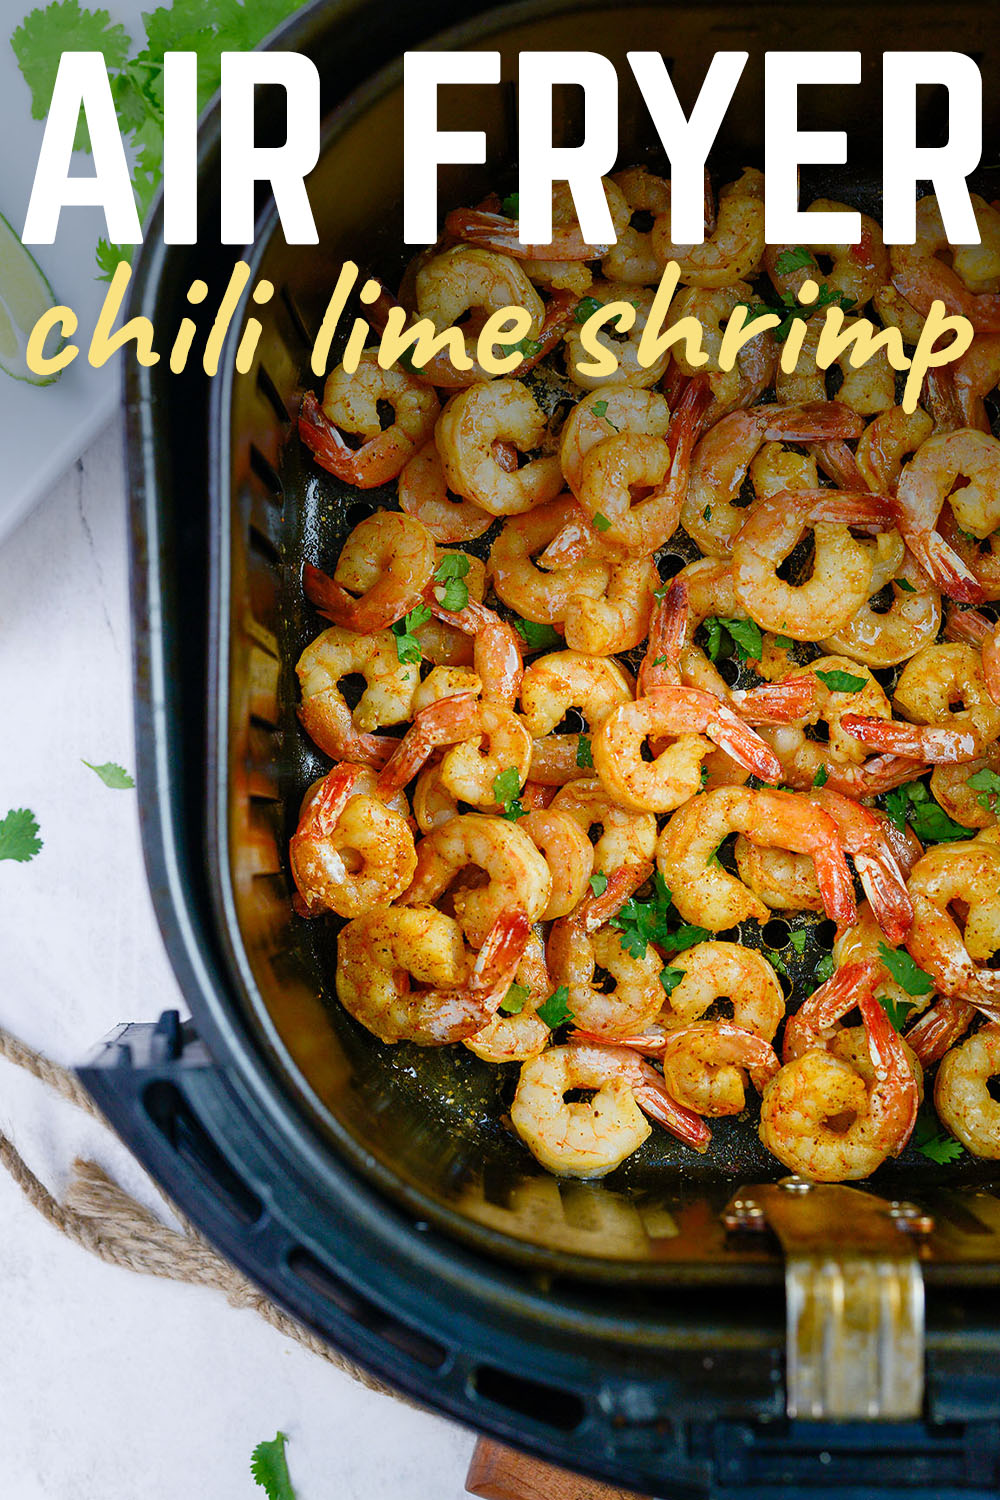 Air fryer chili lime shrimp cook in under 10 minutes!  This is a great appetizer for people who want to dine just a little SPICY!